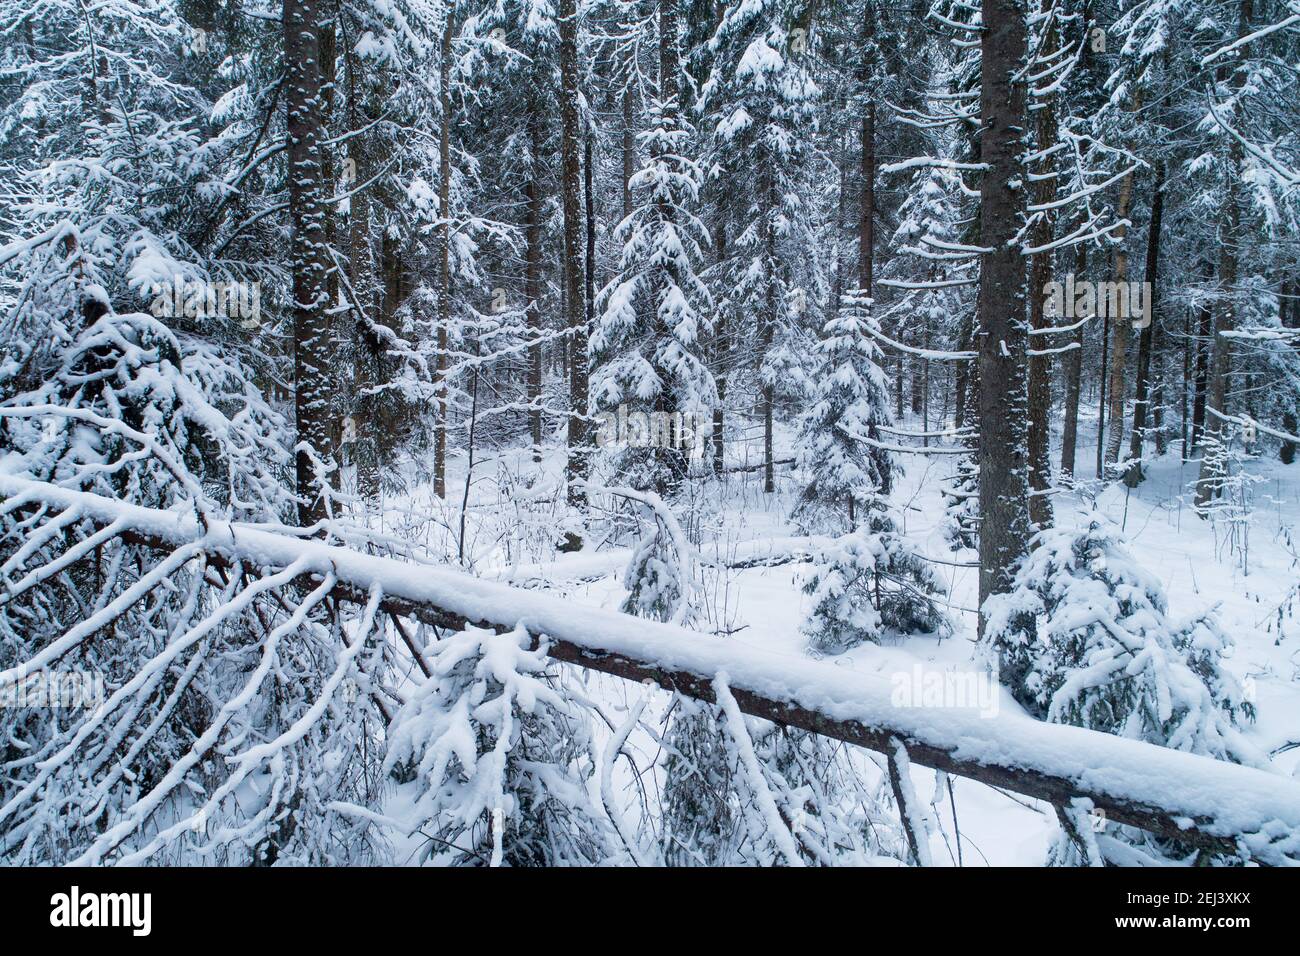 A darkening snowy boreal forest with snow covered trees and a fallen trunk in the foreground. Shot in Estonia, Northern Europe. Stock Photo